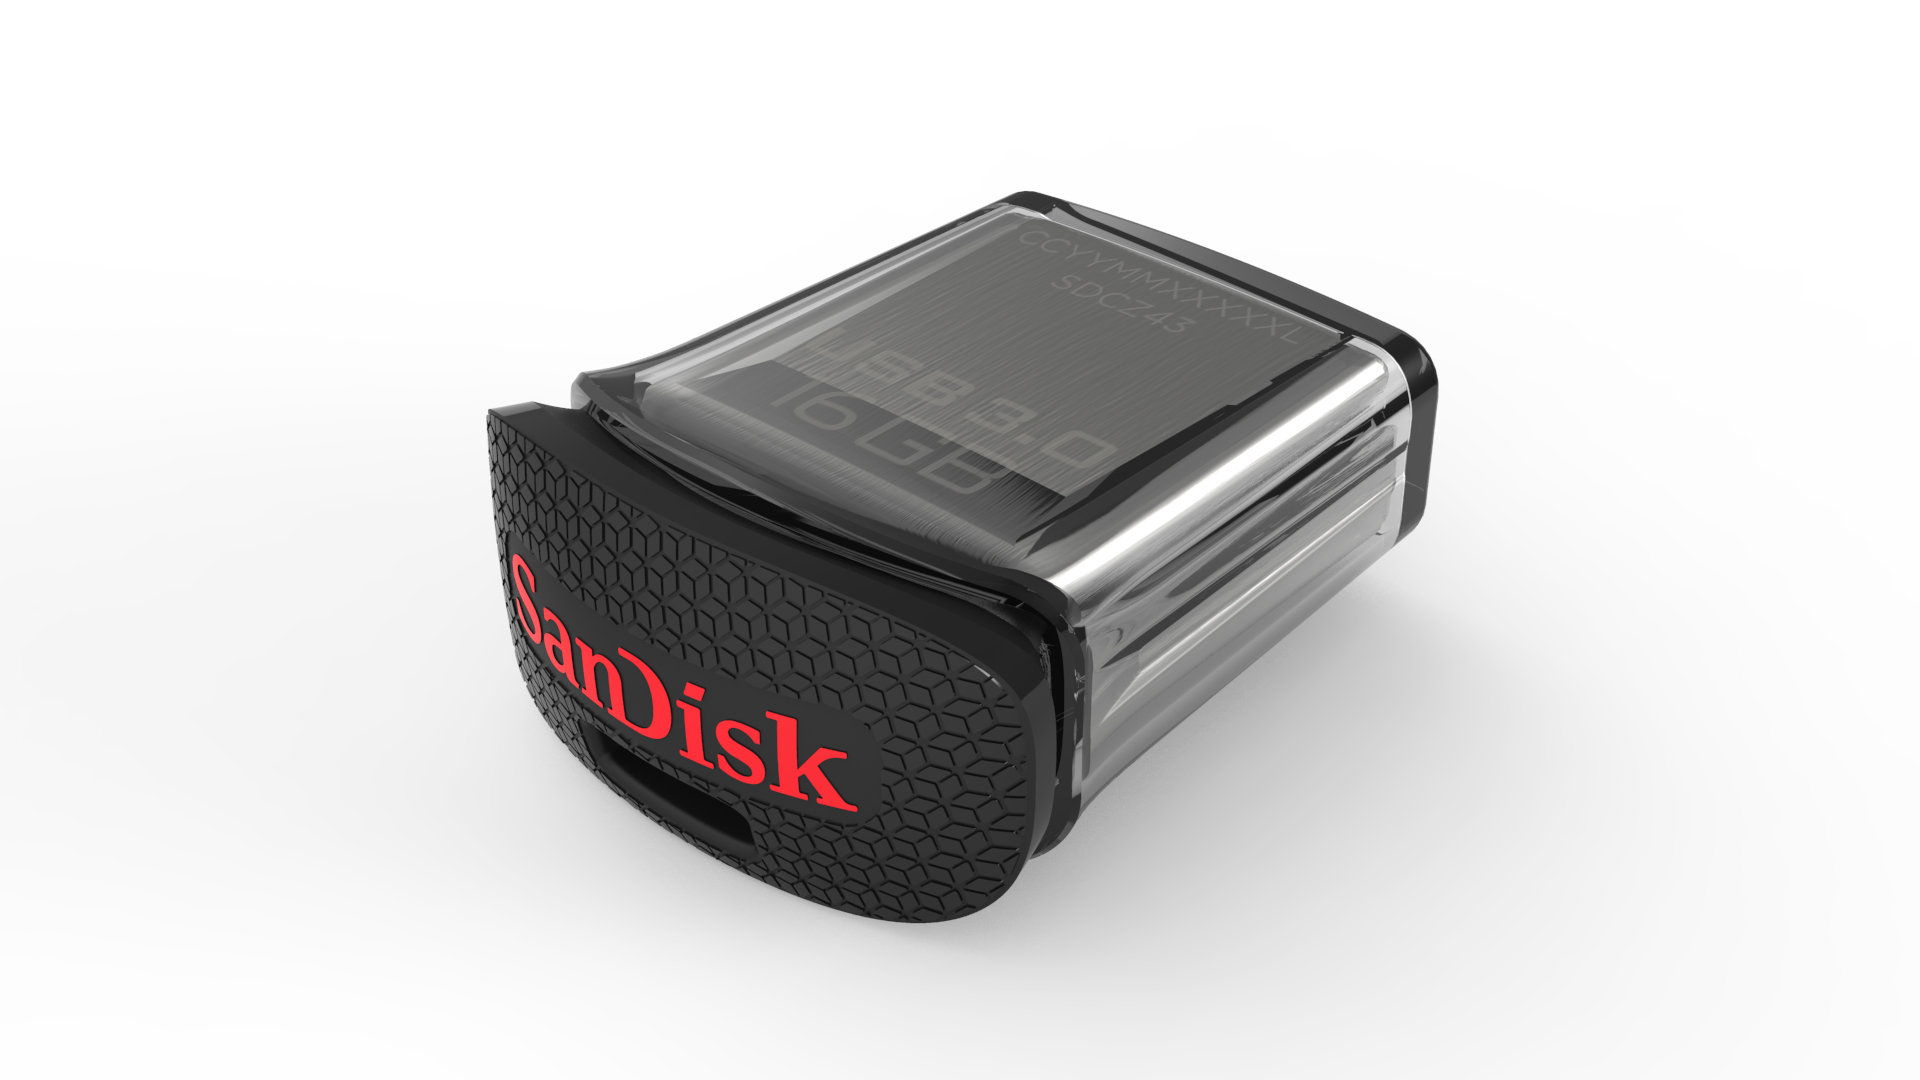 SanDisk 16GB Ultra Fit™ USB 3.0 Flash Drive - SDCZ43-016G-A46 - image 2 of 4